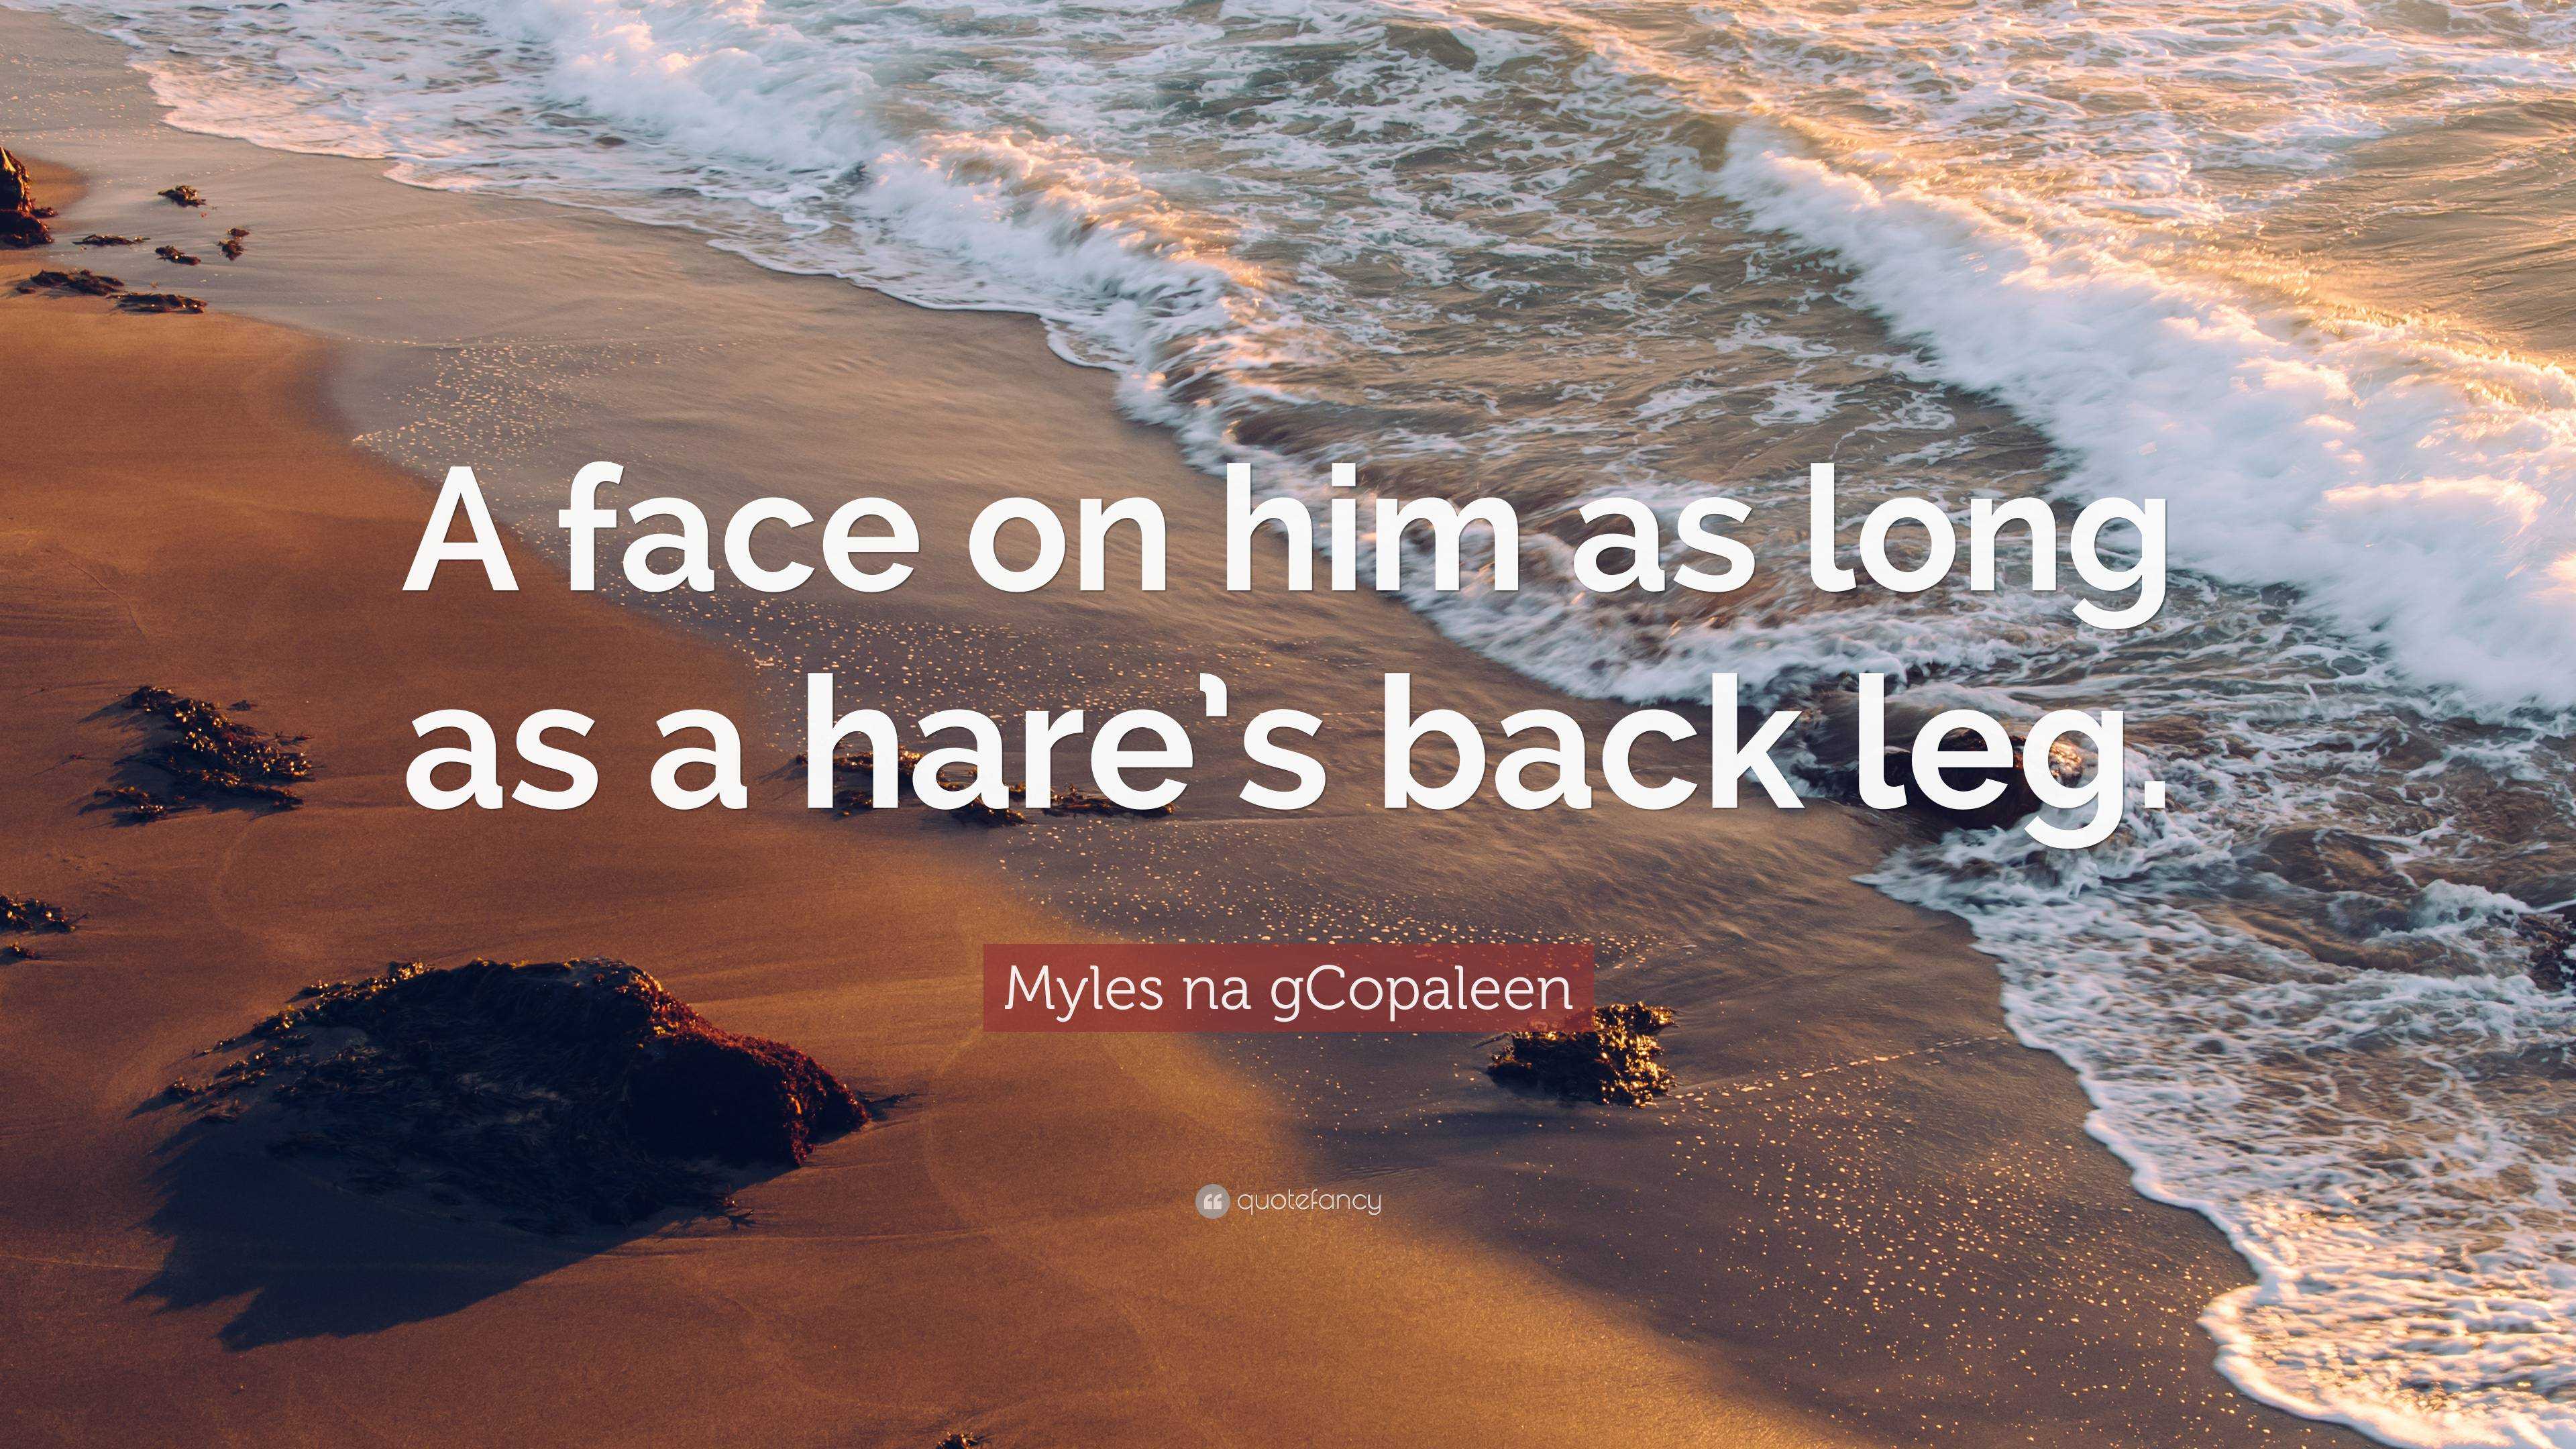 Myles na gCopaleen Quote: “A face on him as long as a hare’s back leg.”